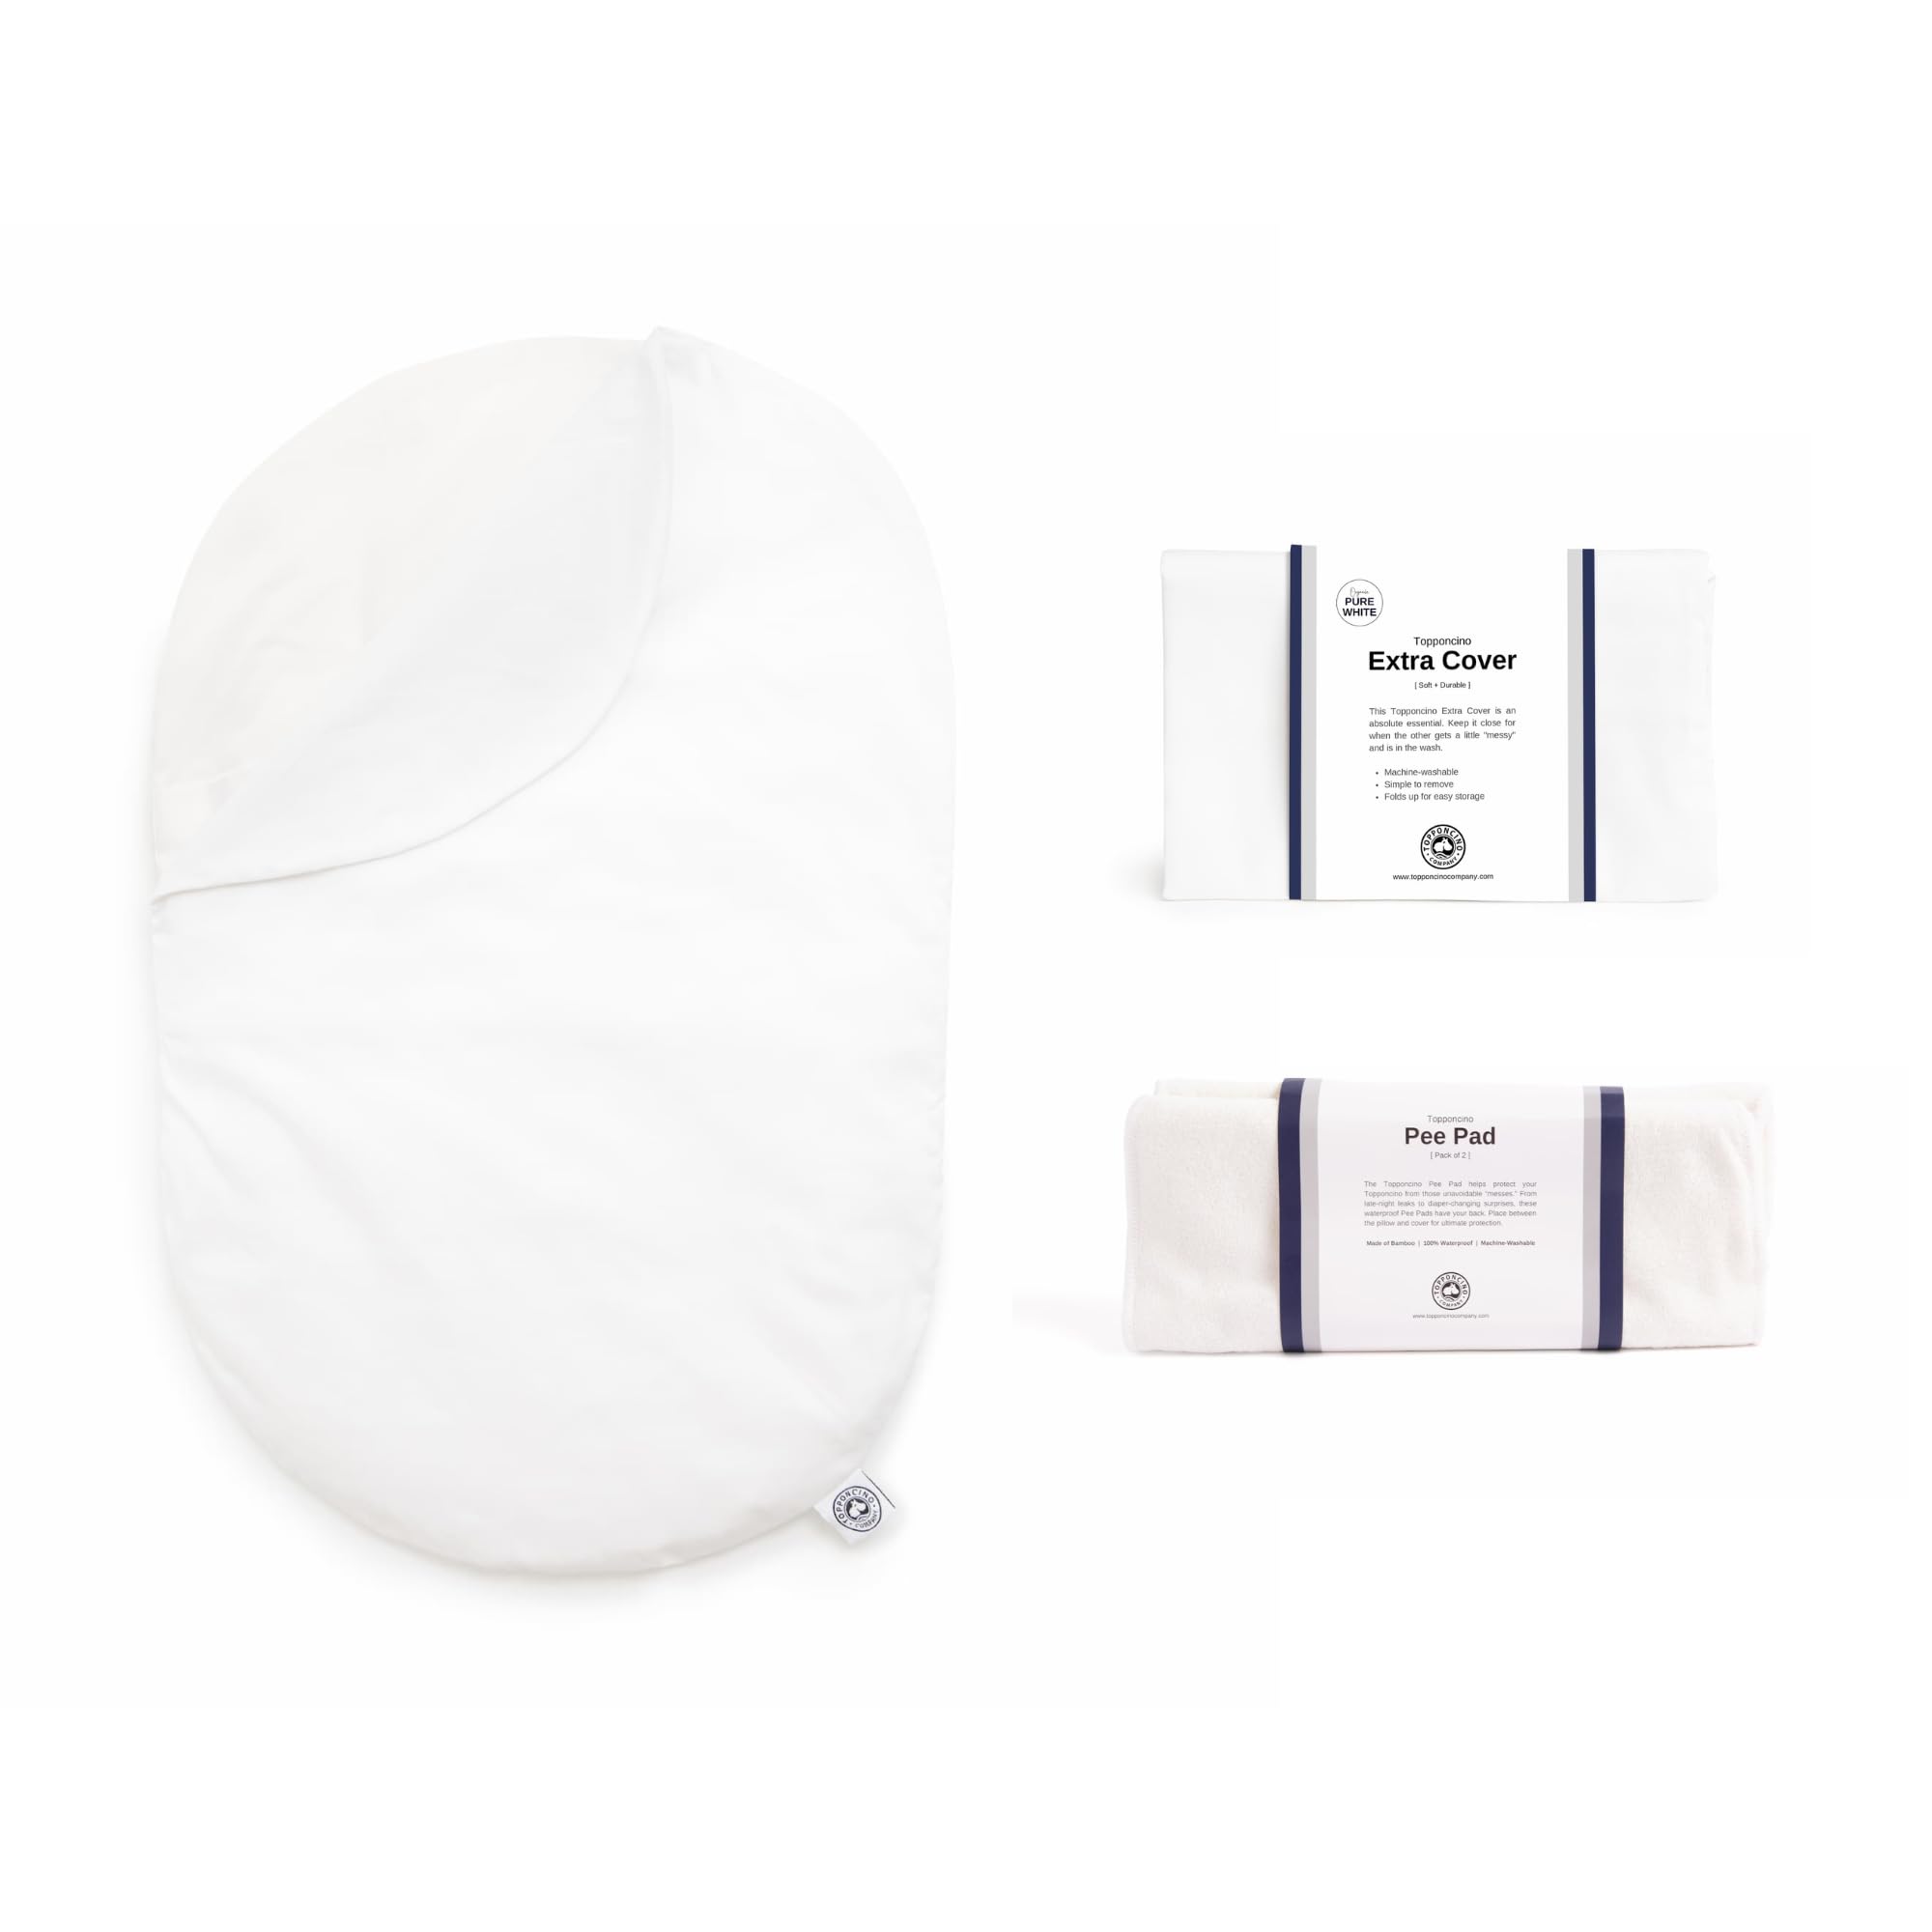 Topponcino Bundle (Organic White) | Organic Topponcino, Organic Extra Cover, and Pee Pads